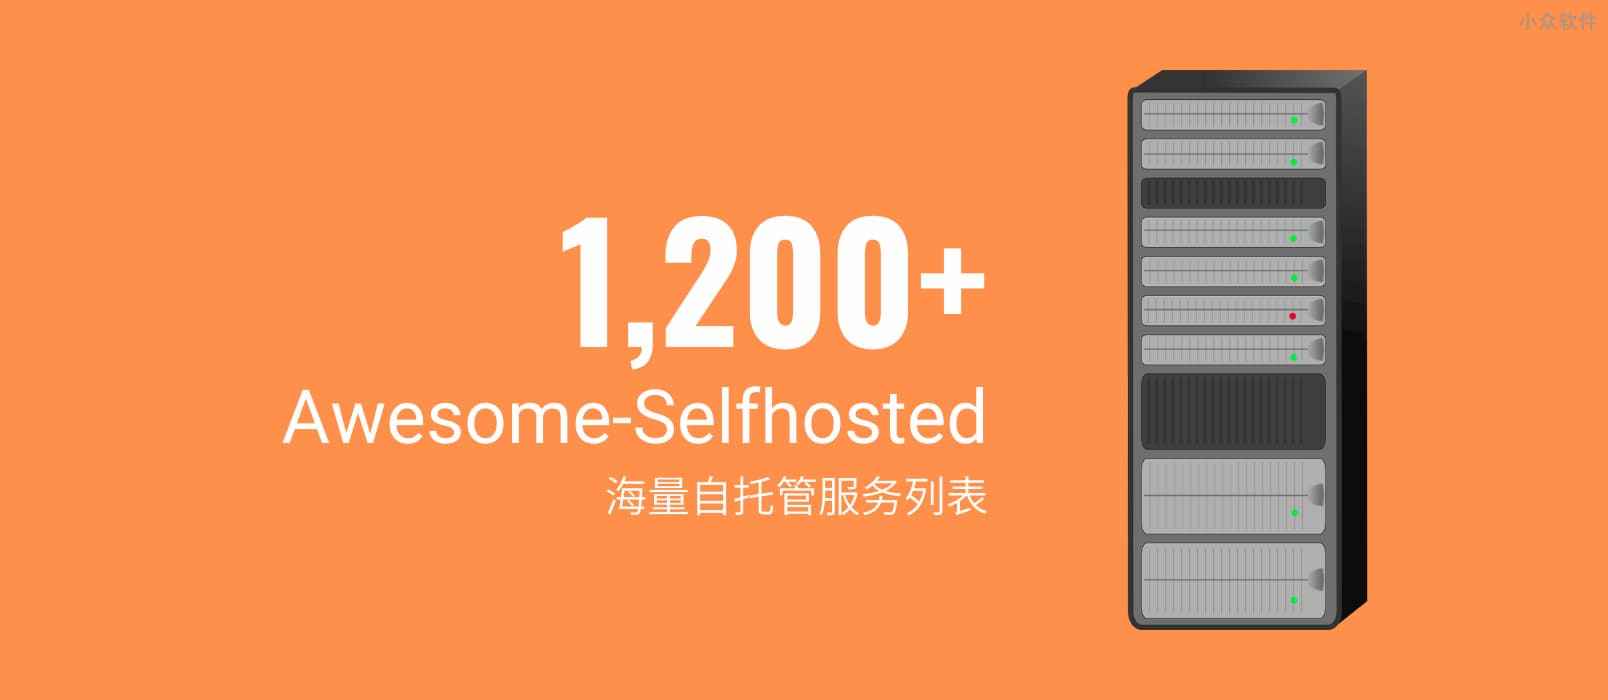 Awesome-Selfhosted - 超过 1200 个，海量「自托管服务」项目列表 1